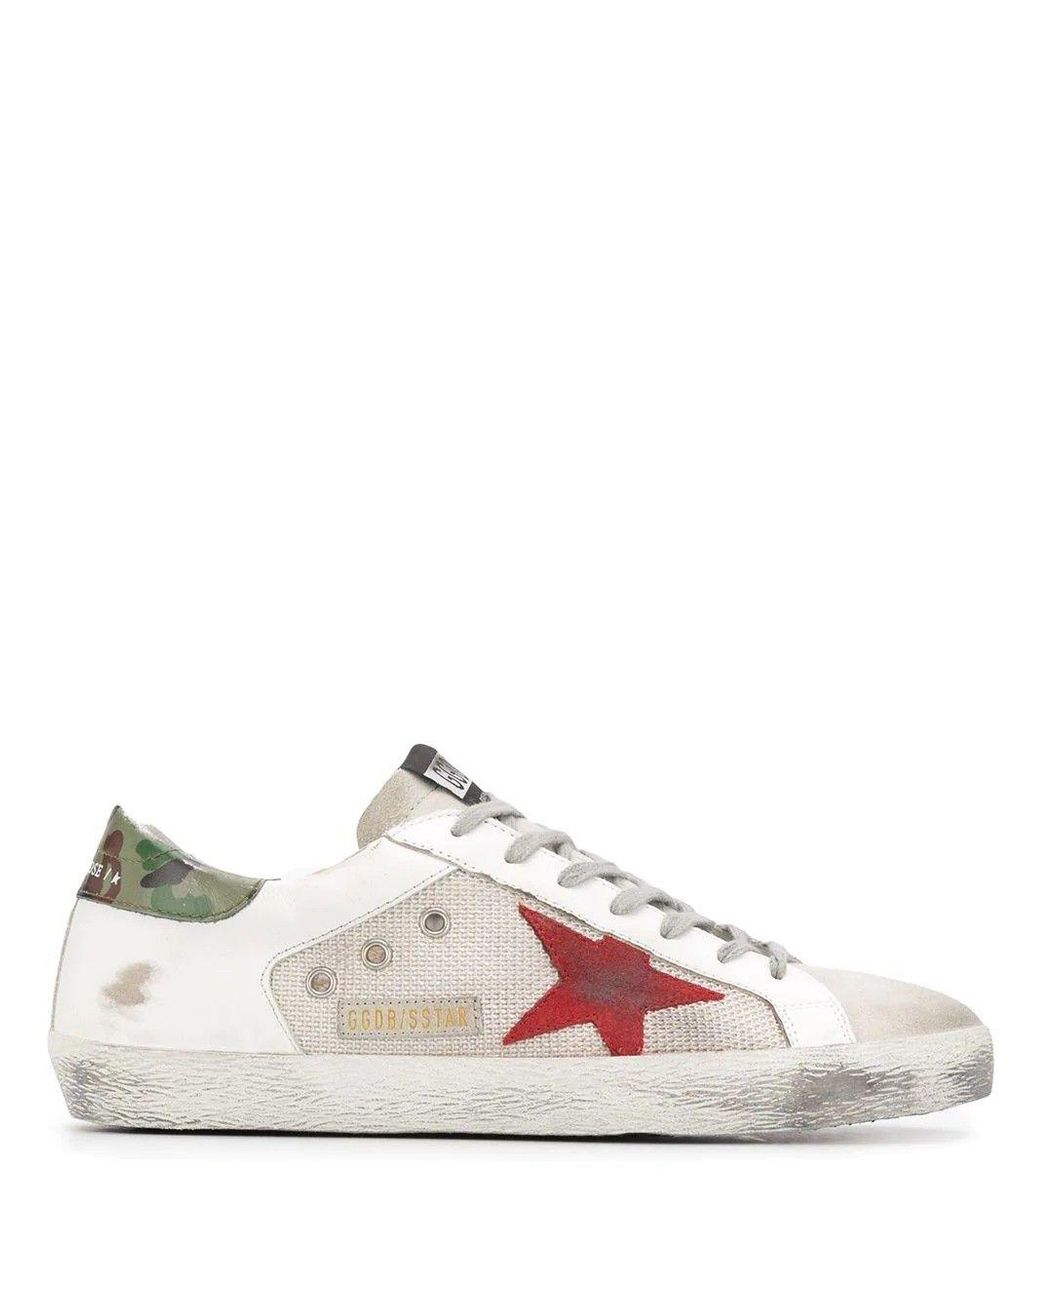 Golden Goose Deluxe Brand Goose Leather Sneakers in White for Men - Lyst